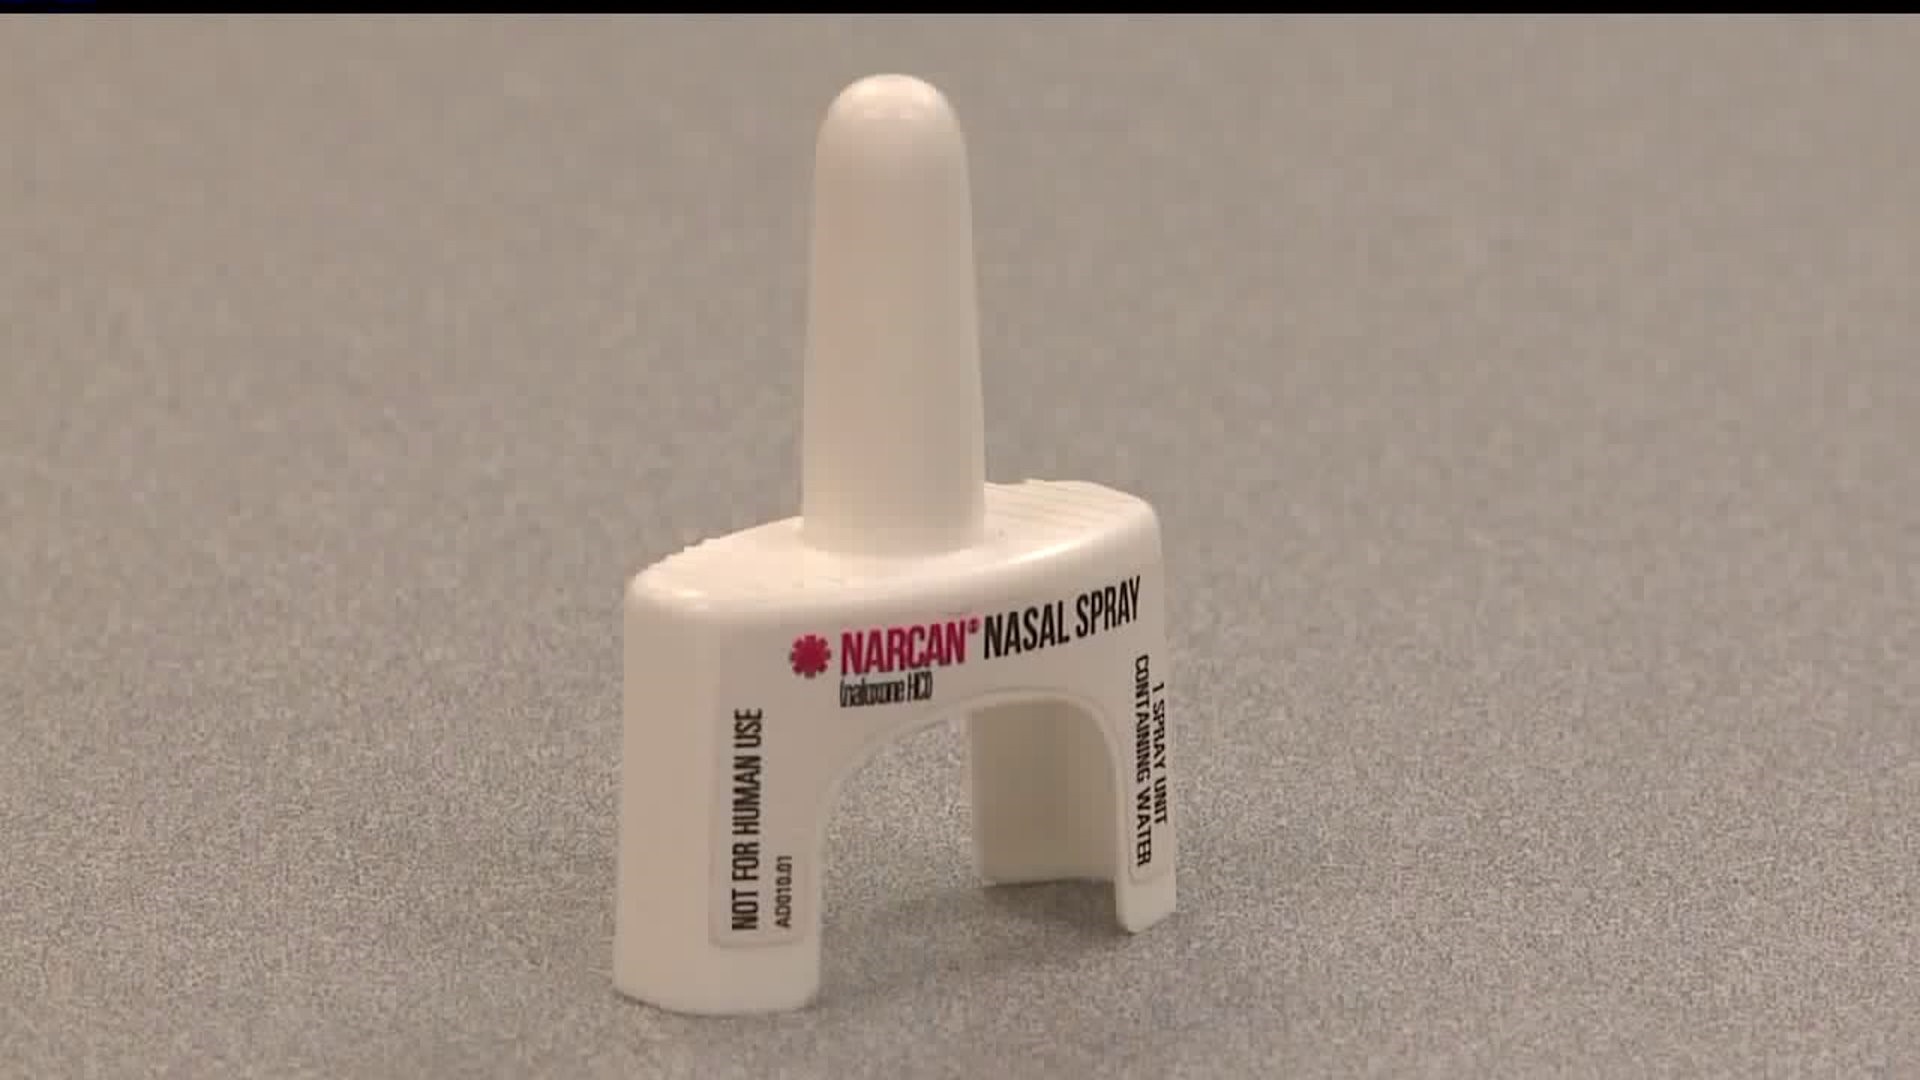 York County firefighters to carry Narcan